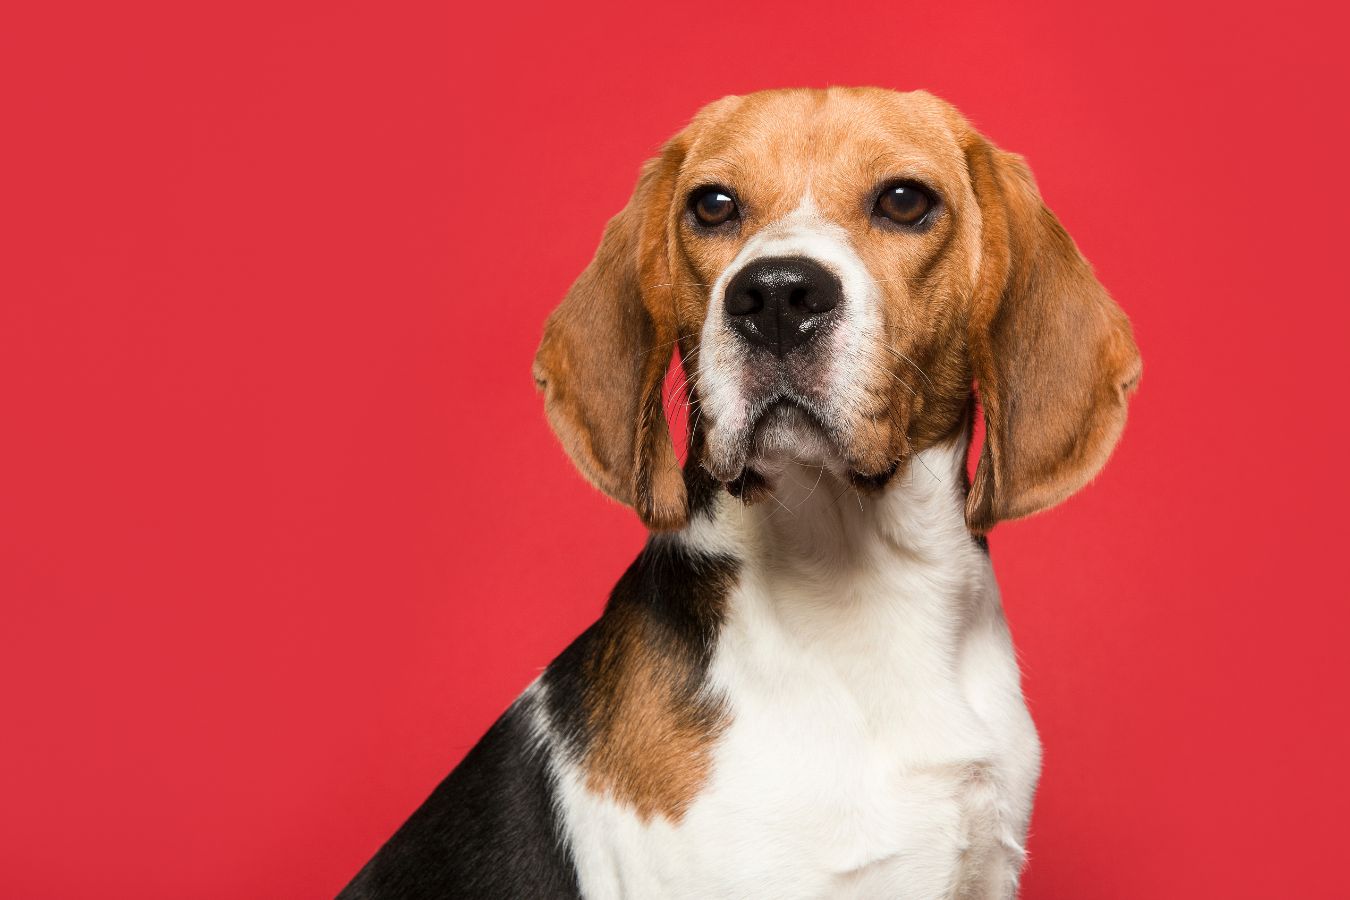 Beagle in red background